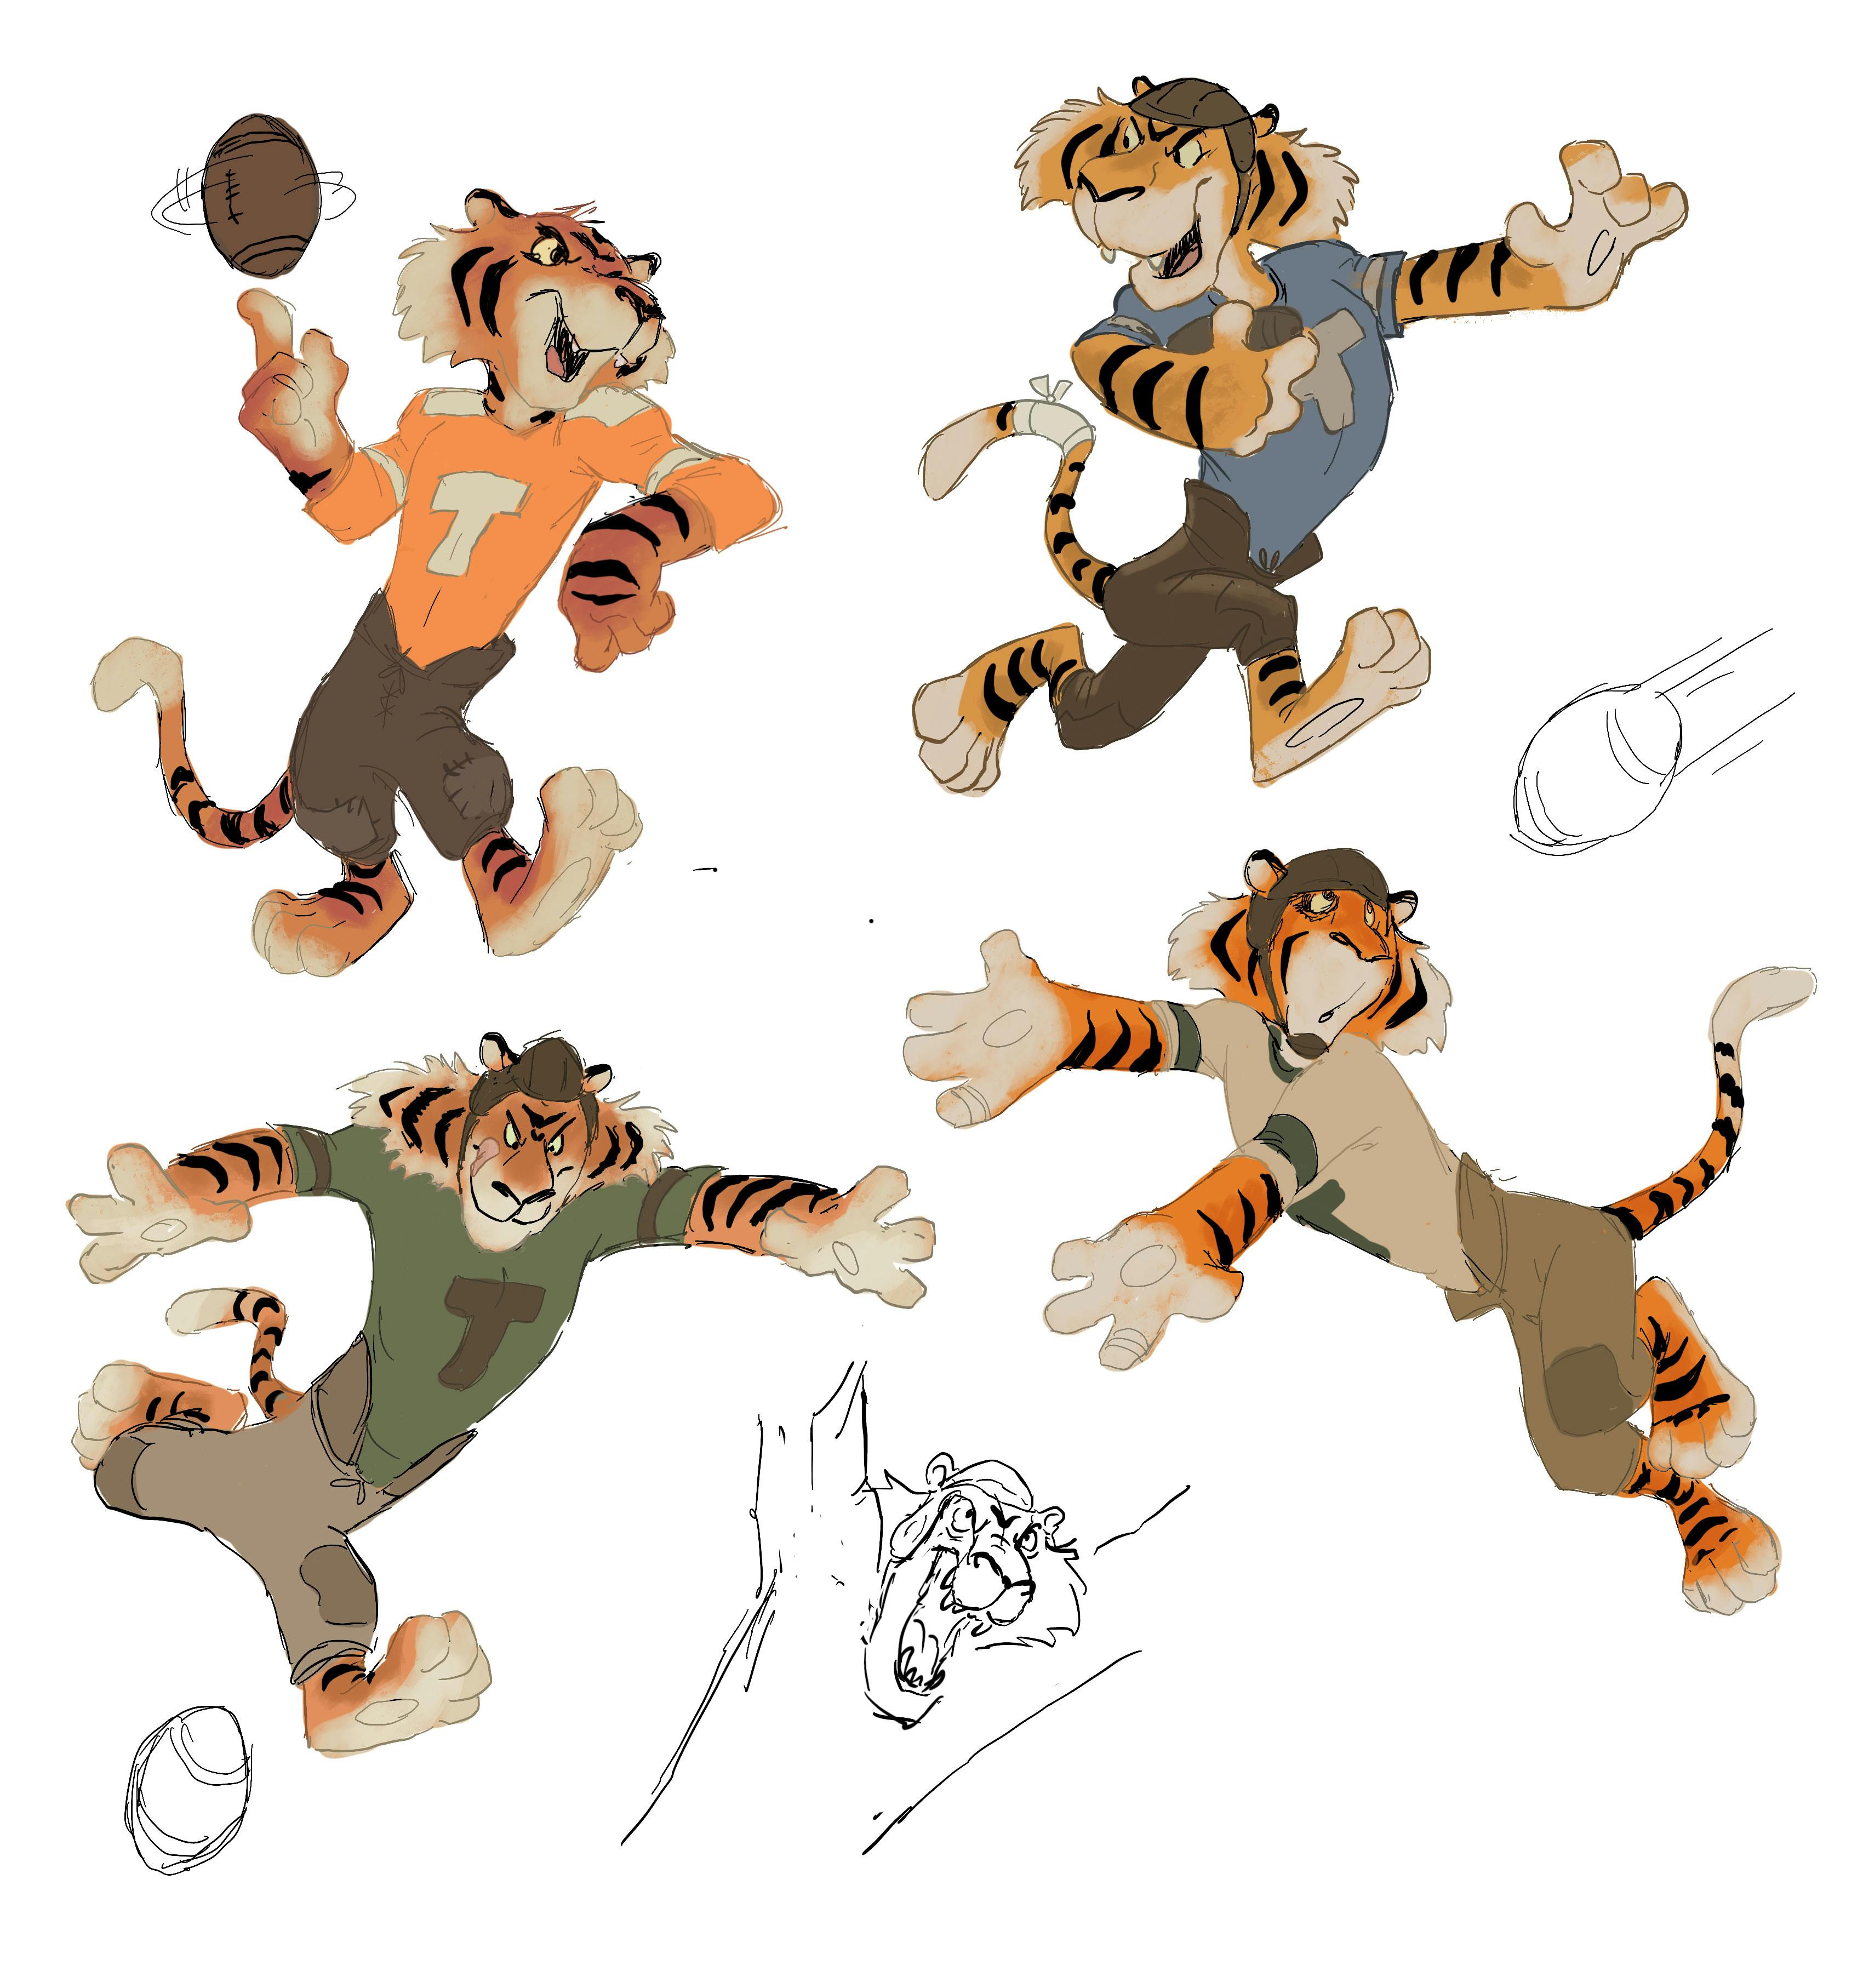 Concept sketches of a tiger playing football